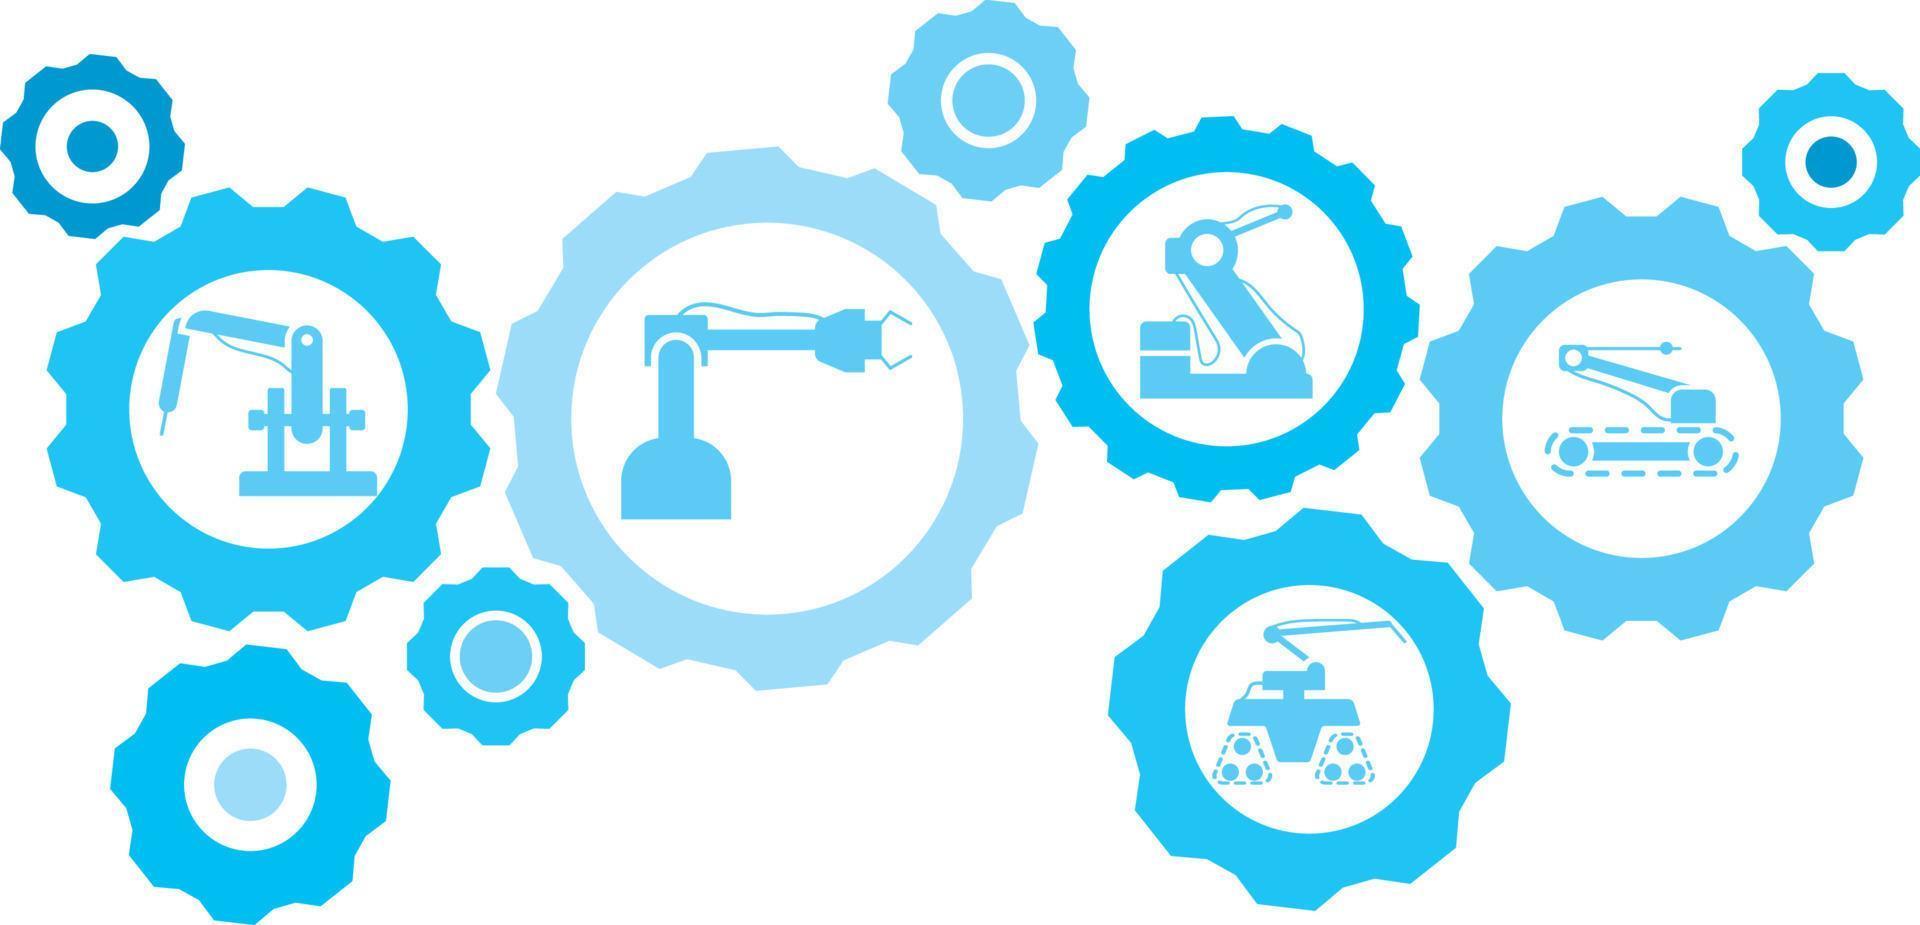 Robot, icon, technology, industry, factory blue gear set. Abstract background with connected gears and icons for logistic, service, shipping, distribution, transport, market, communicate concepts vector